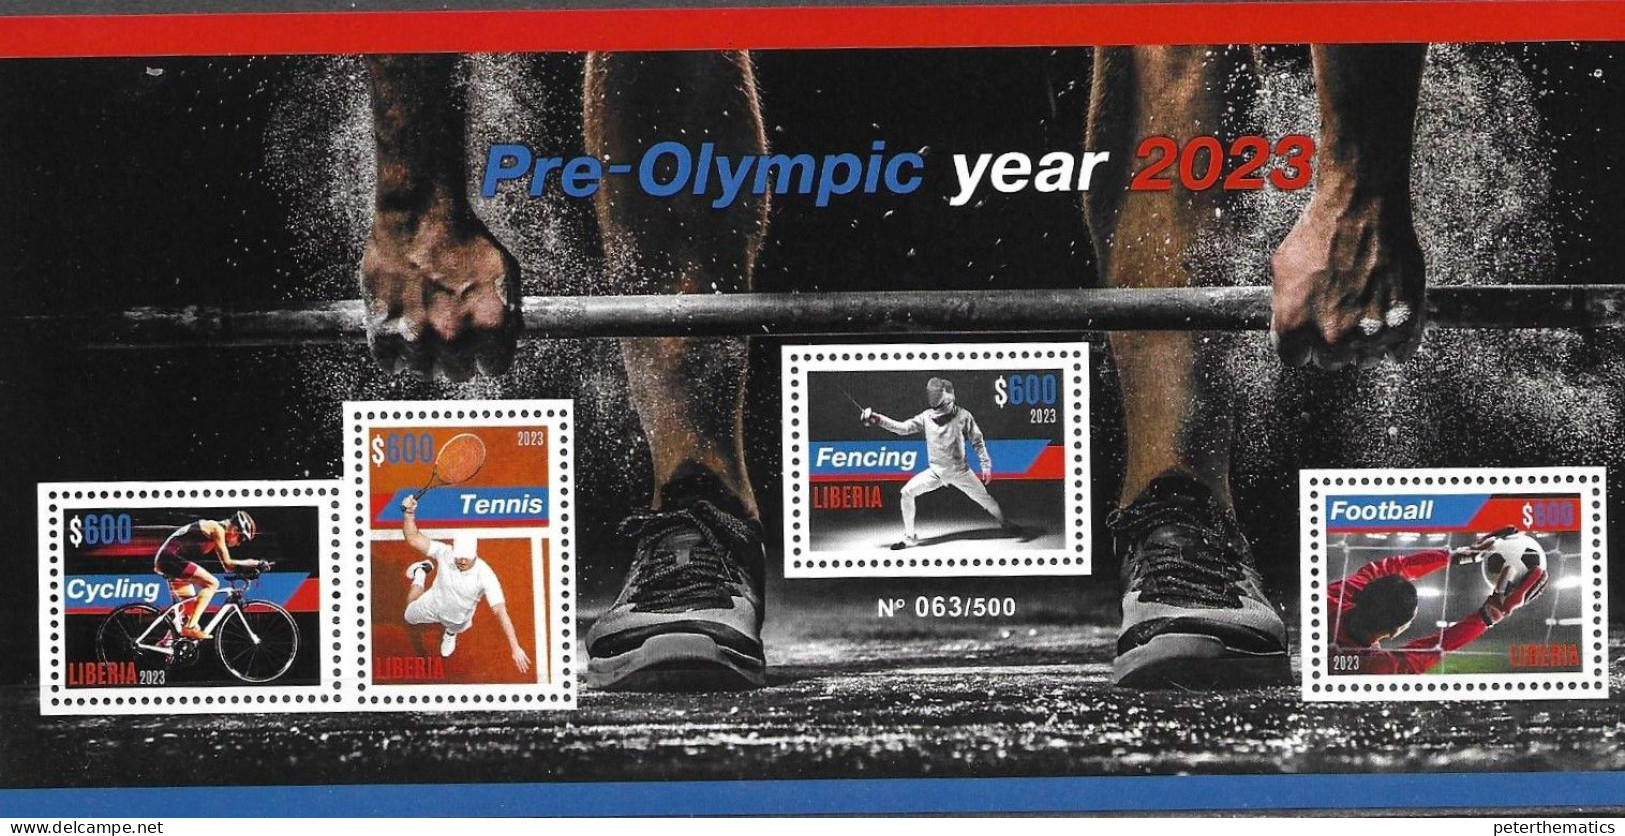 LIBERIA, 2023, MNH, PREOLYMPIC ISSUE, PARIS OLYMPICS, FOOTBALL, CYCLING, TENNIS, FENCING, LIMITED NUMBERED SLT, OFFICIAL - Verano 2024 : París